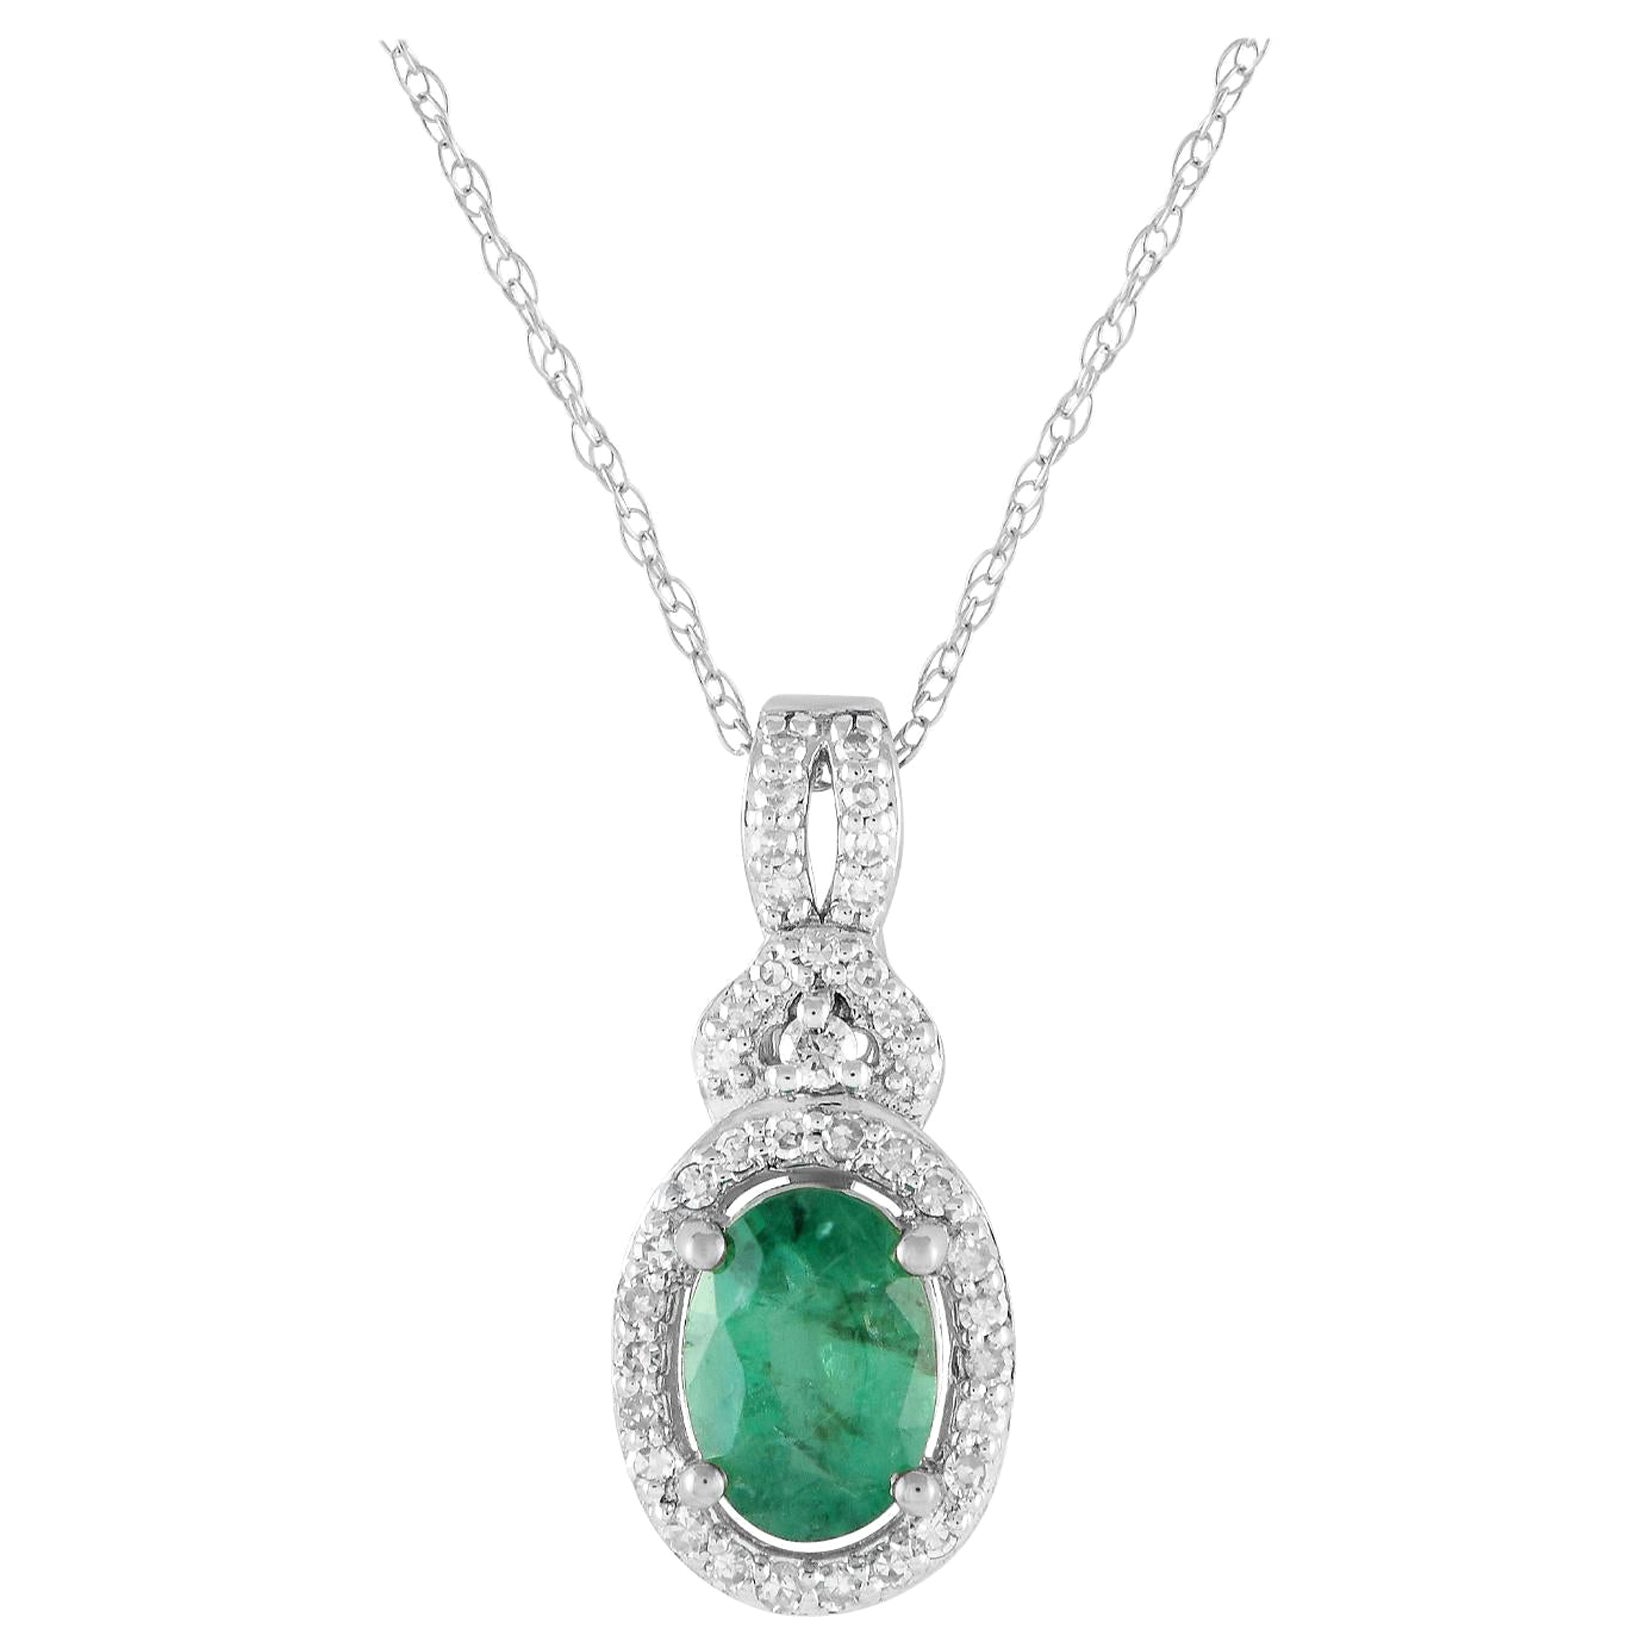 LB Exclusive 14K White Gold 0.15ct Diamond and Emerald Necklace PD4-15738WEM For Sale